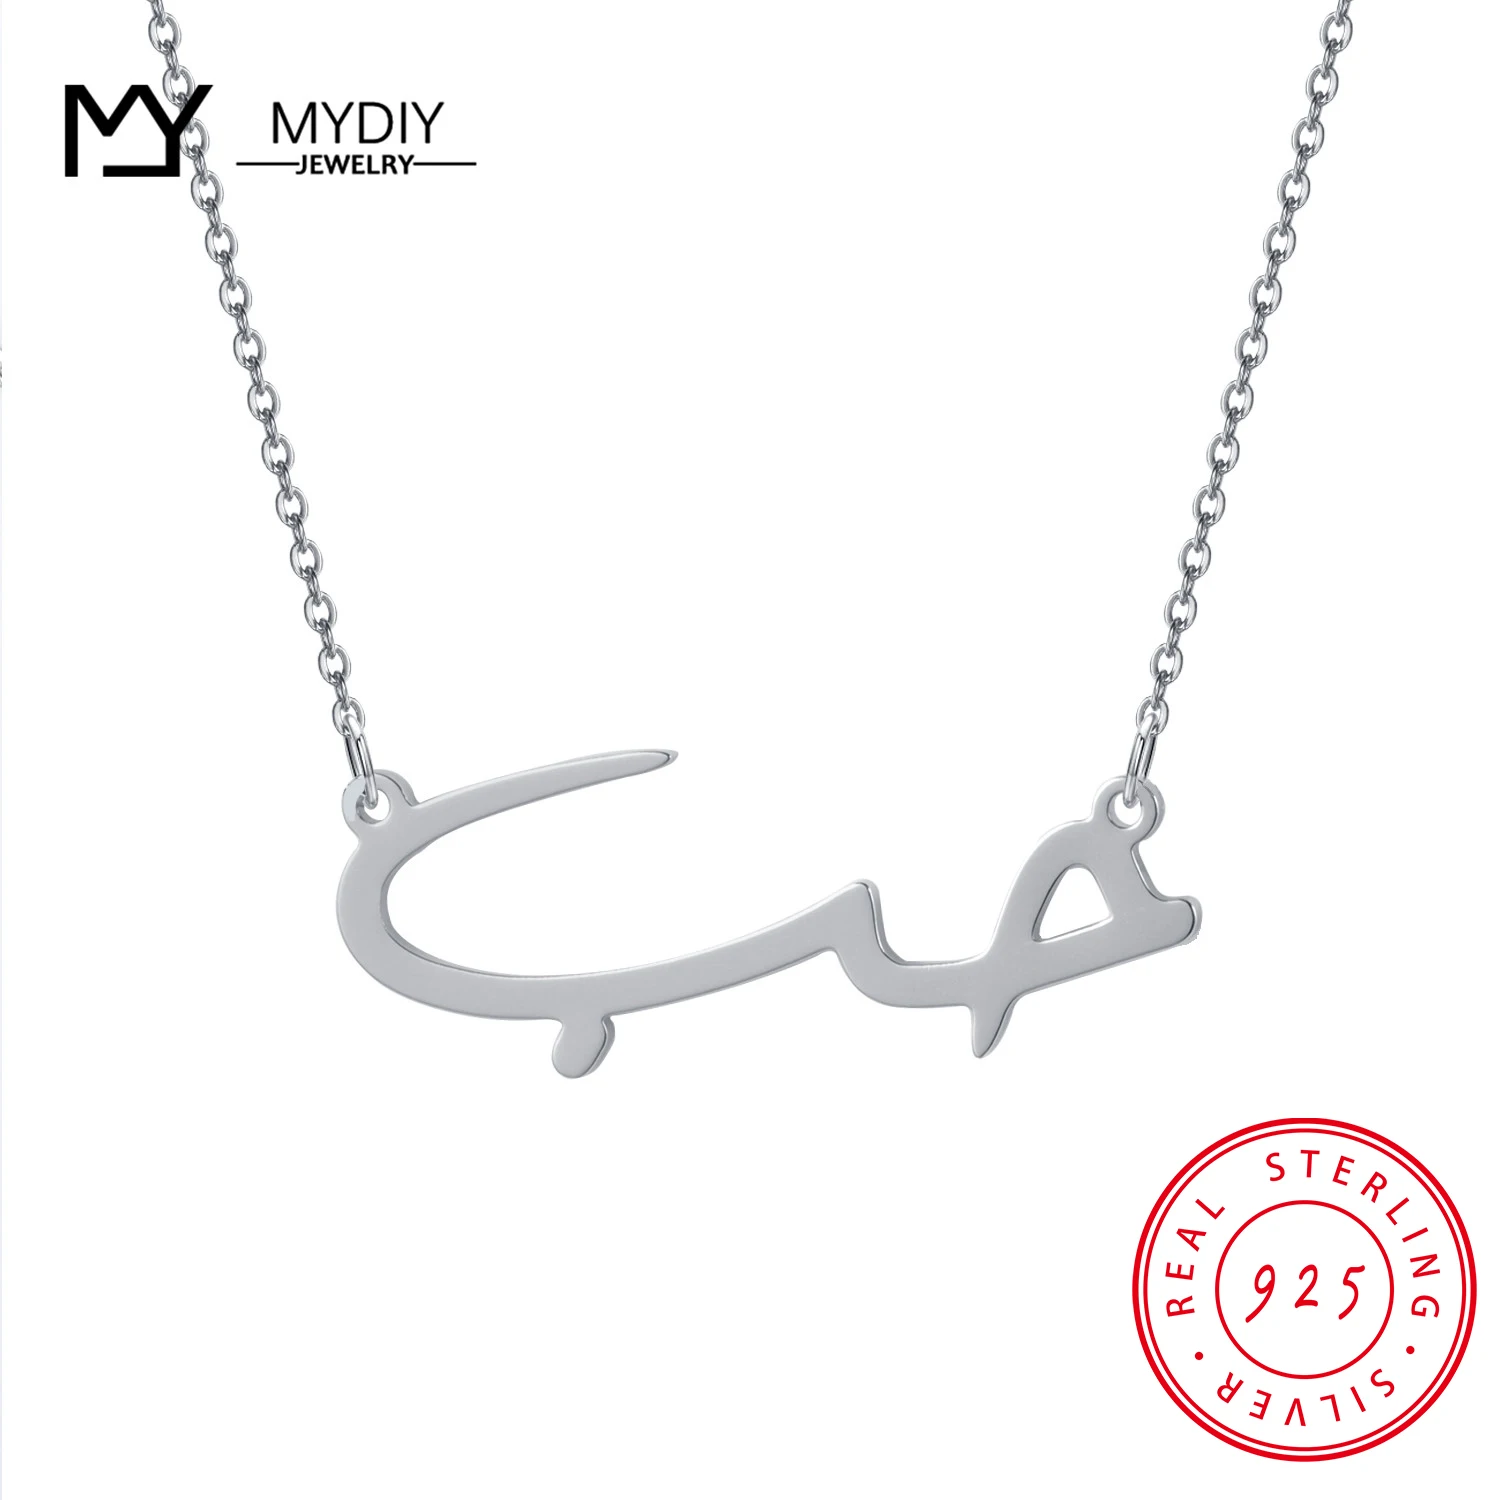 

MYDIY 925 Sterling Silver Custom Arabic Name Necklace with Birthstone Personalized Nameplate Necklace Birthday Gift for Her